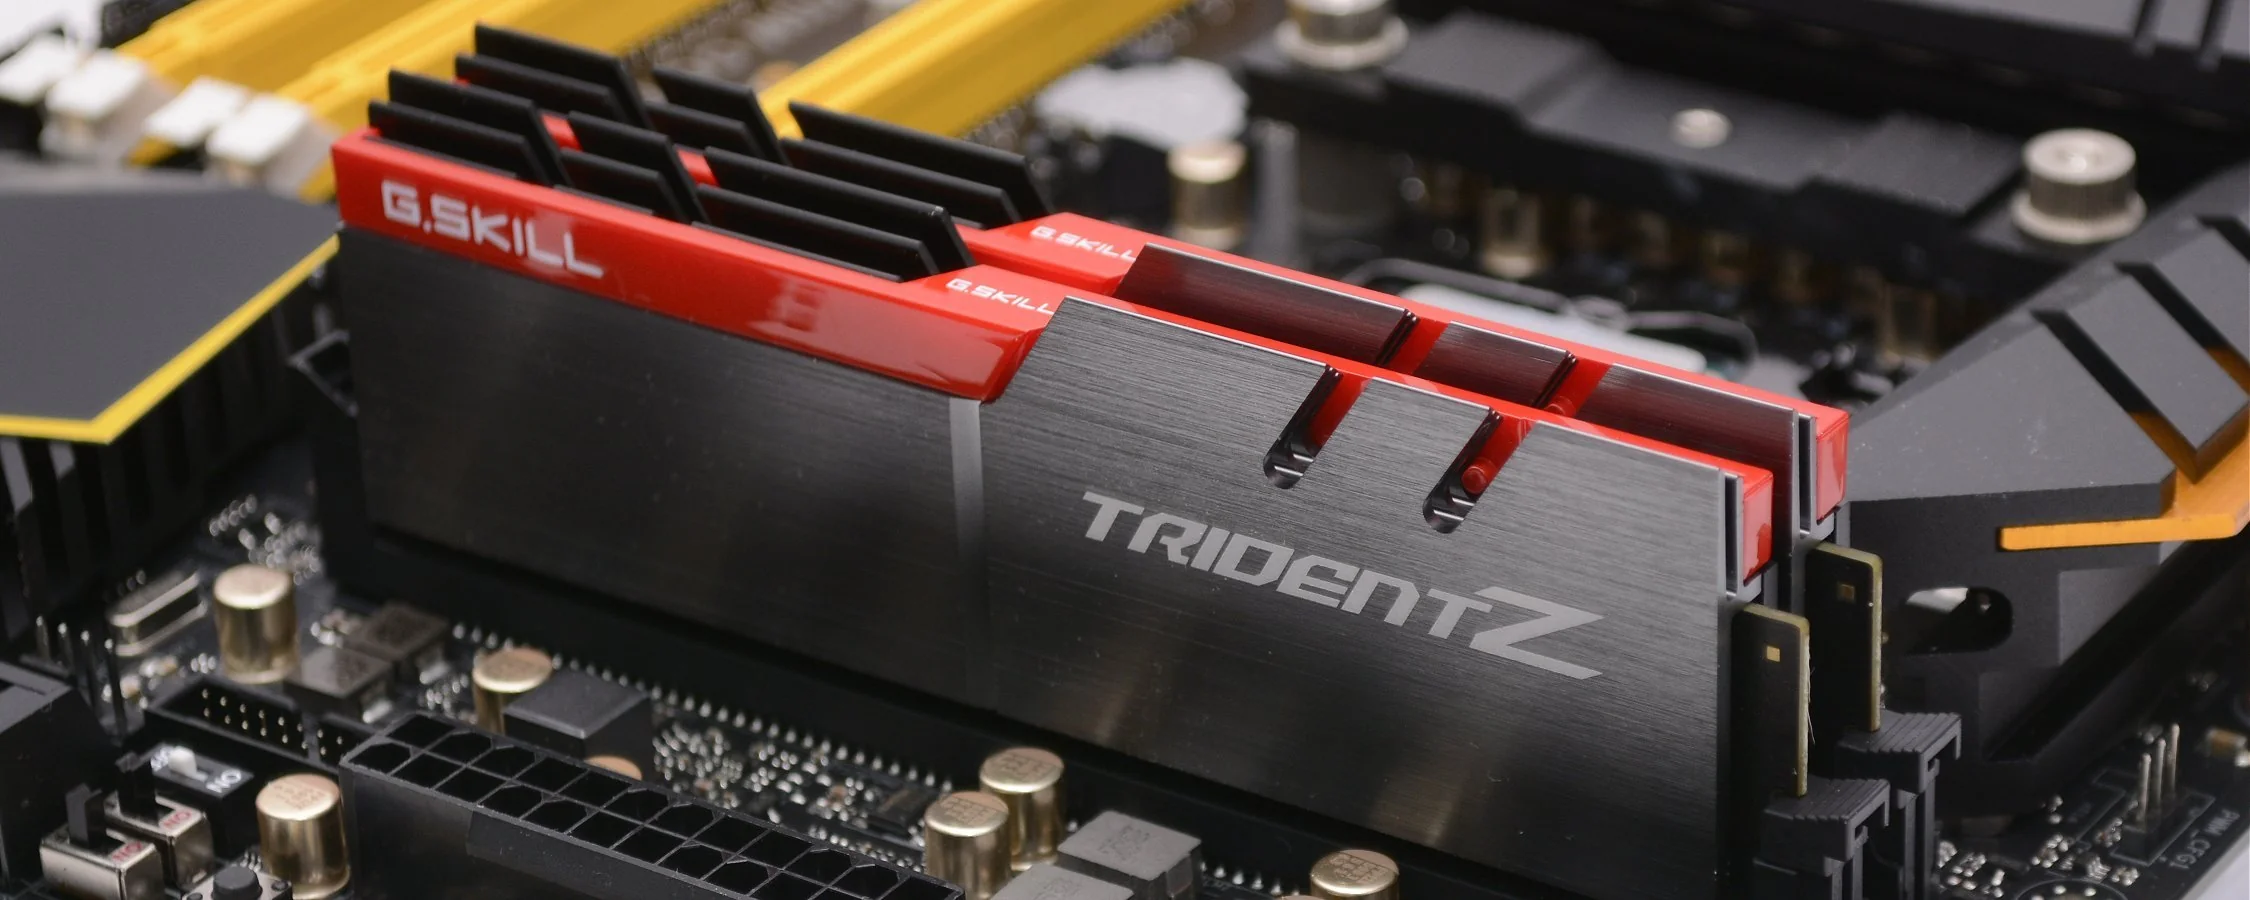 How Does RAM Increase Performance